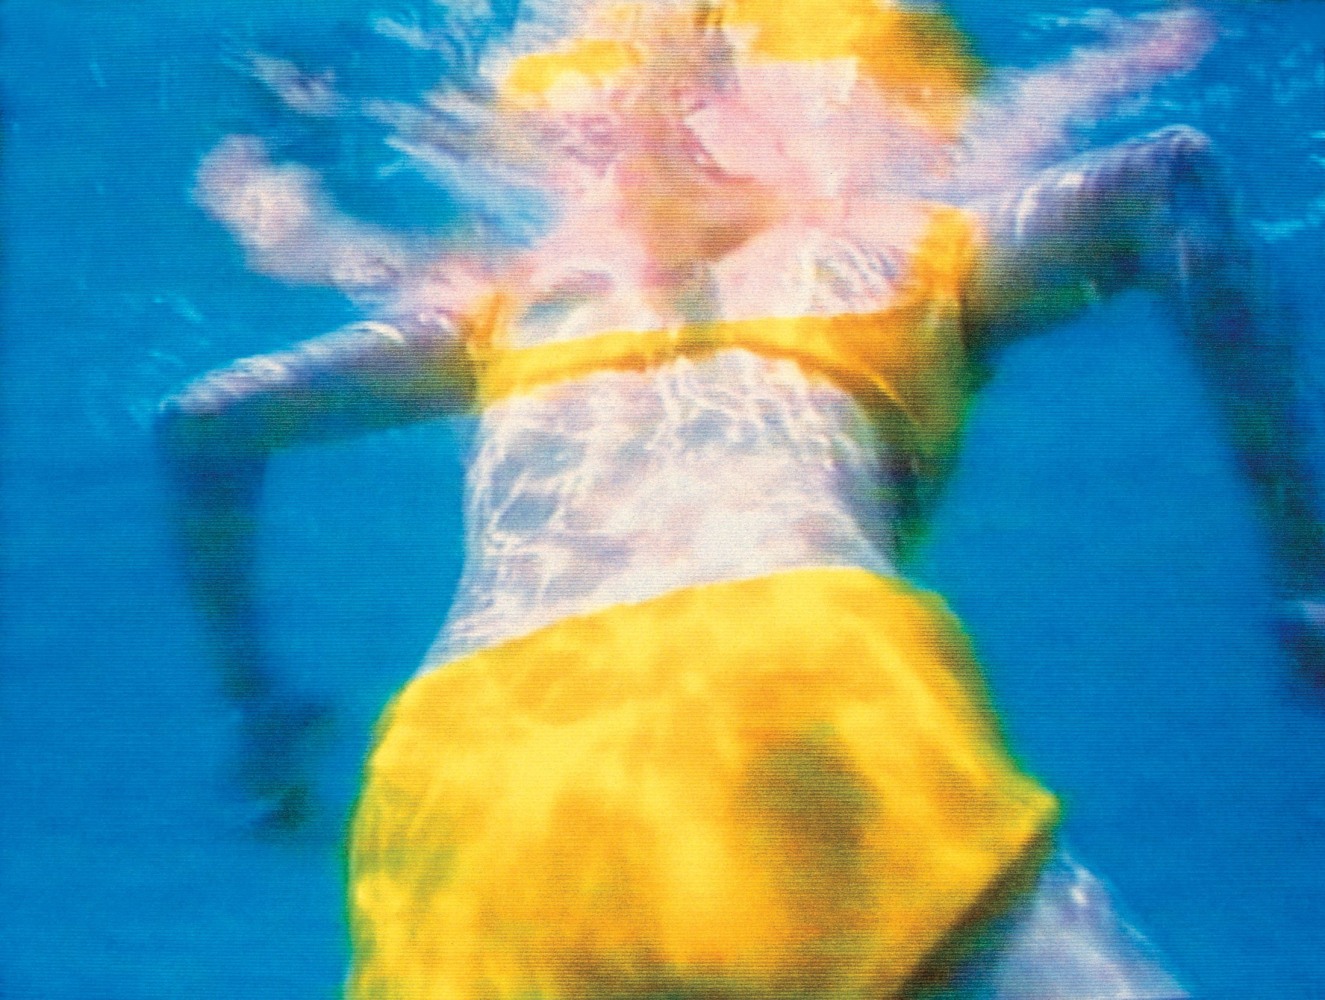 Pipilotti Rist
Sip My Ocean, 1996
Two-channel video and sound installation, color, with carpet
Video still
Duration: 10 minutes, 22 seconds